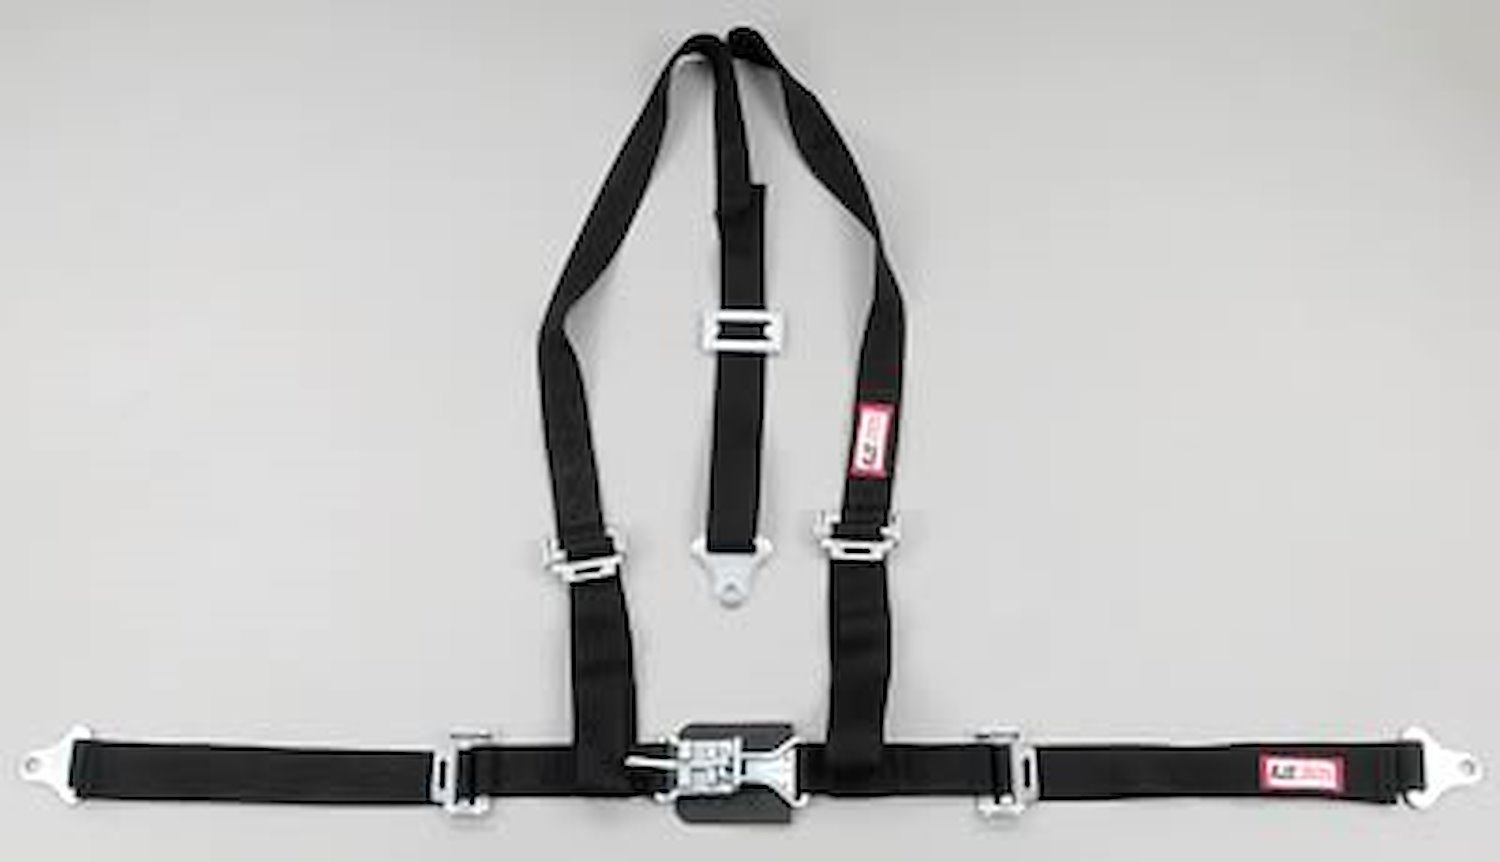 NON-SFI L&L HARNESS 2 PULL UP Lap Belt SNAP SEWN IN 2 S.H. INDIVIDUAL FLOOR Mount w/STERNUM STRAP WRAP/BOLT BLUE